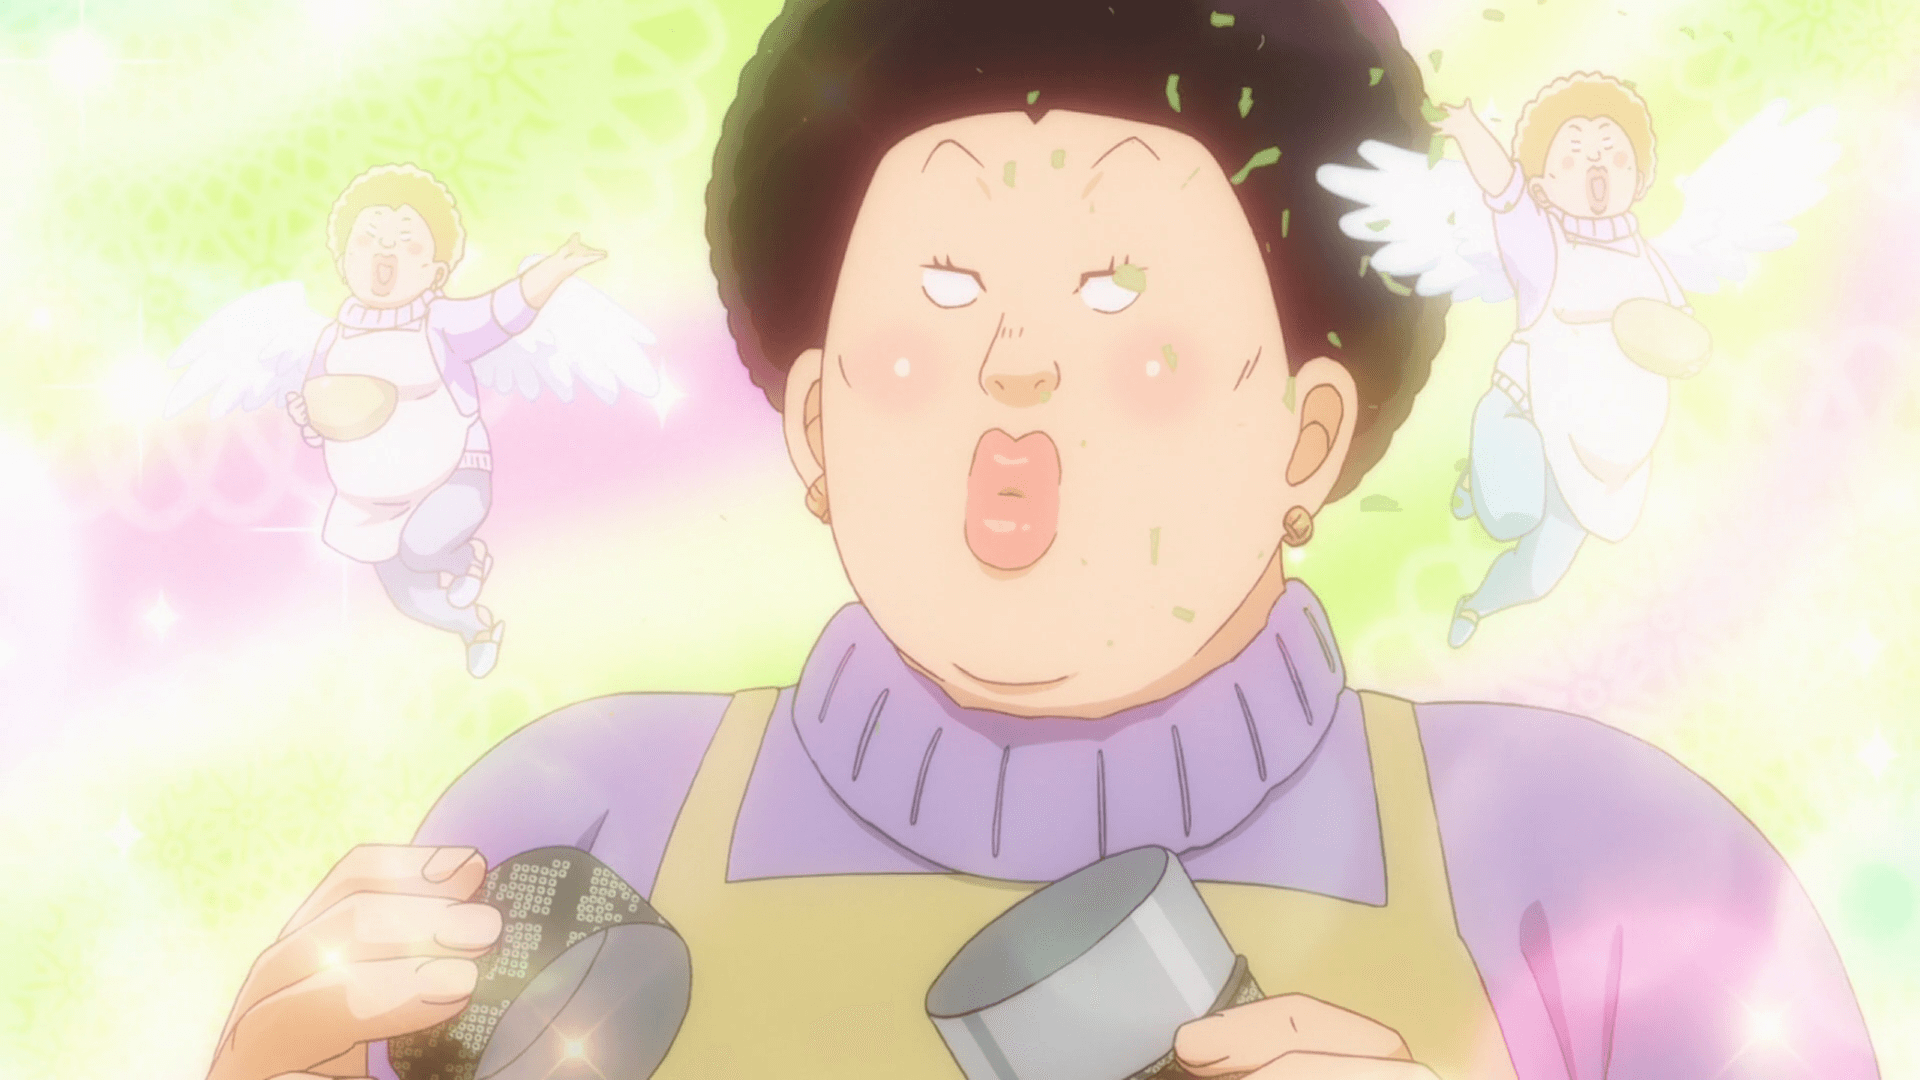 Takeo's mom on discovering her son has a girlfriend. This moment was absolutely HYSTERICAL.